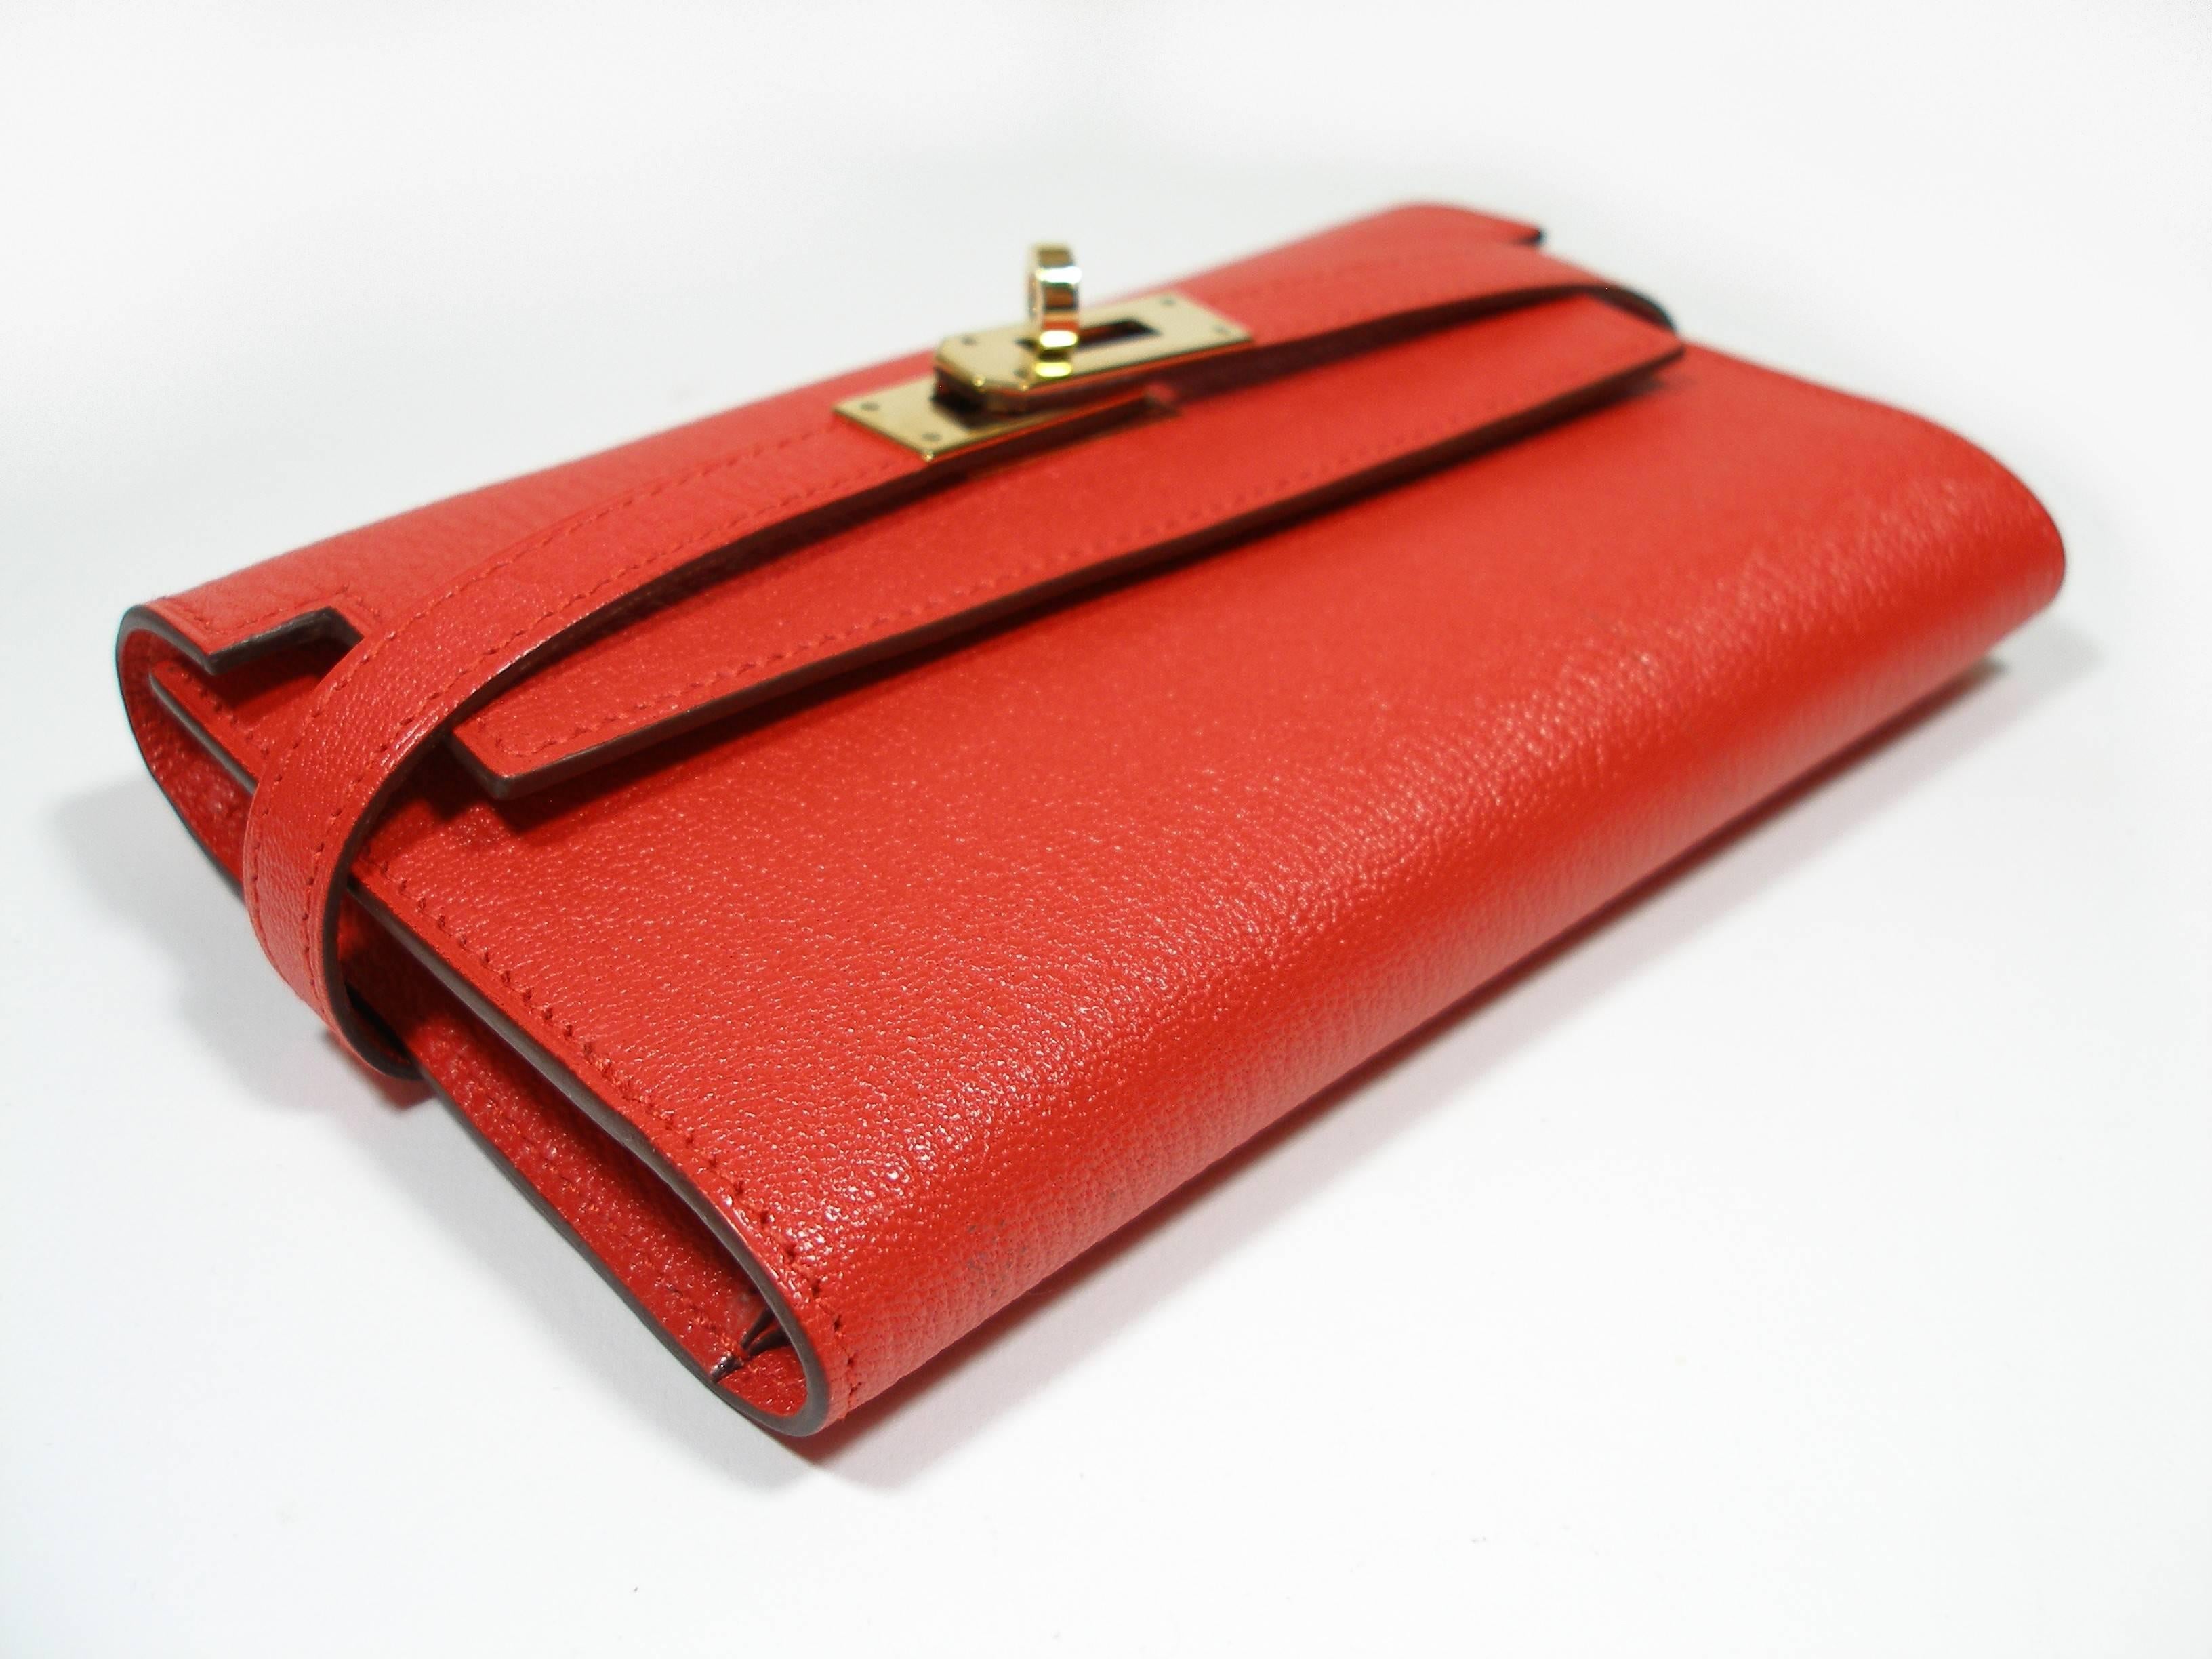 HERMES Chevre Mysore Kelly Compact Wallet Rouge Tomate and permabrass hardware. This stunning clutch wallet is finely crafted of rouge tomate chèvre goatskin leather. The front flap and polished permabrass turn lock open to a matching leather